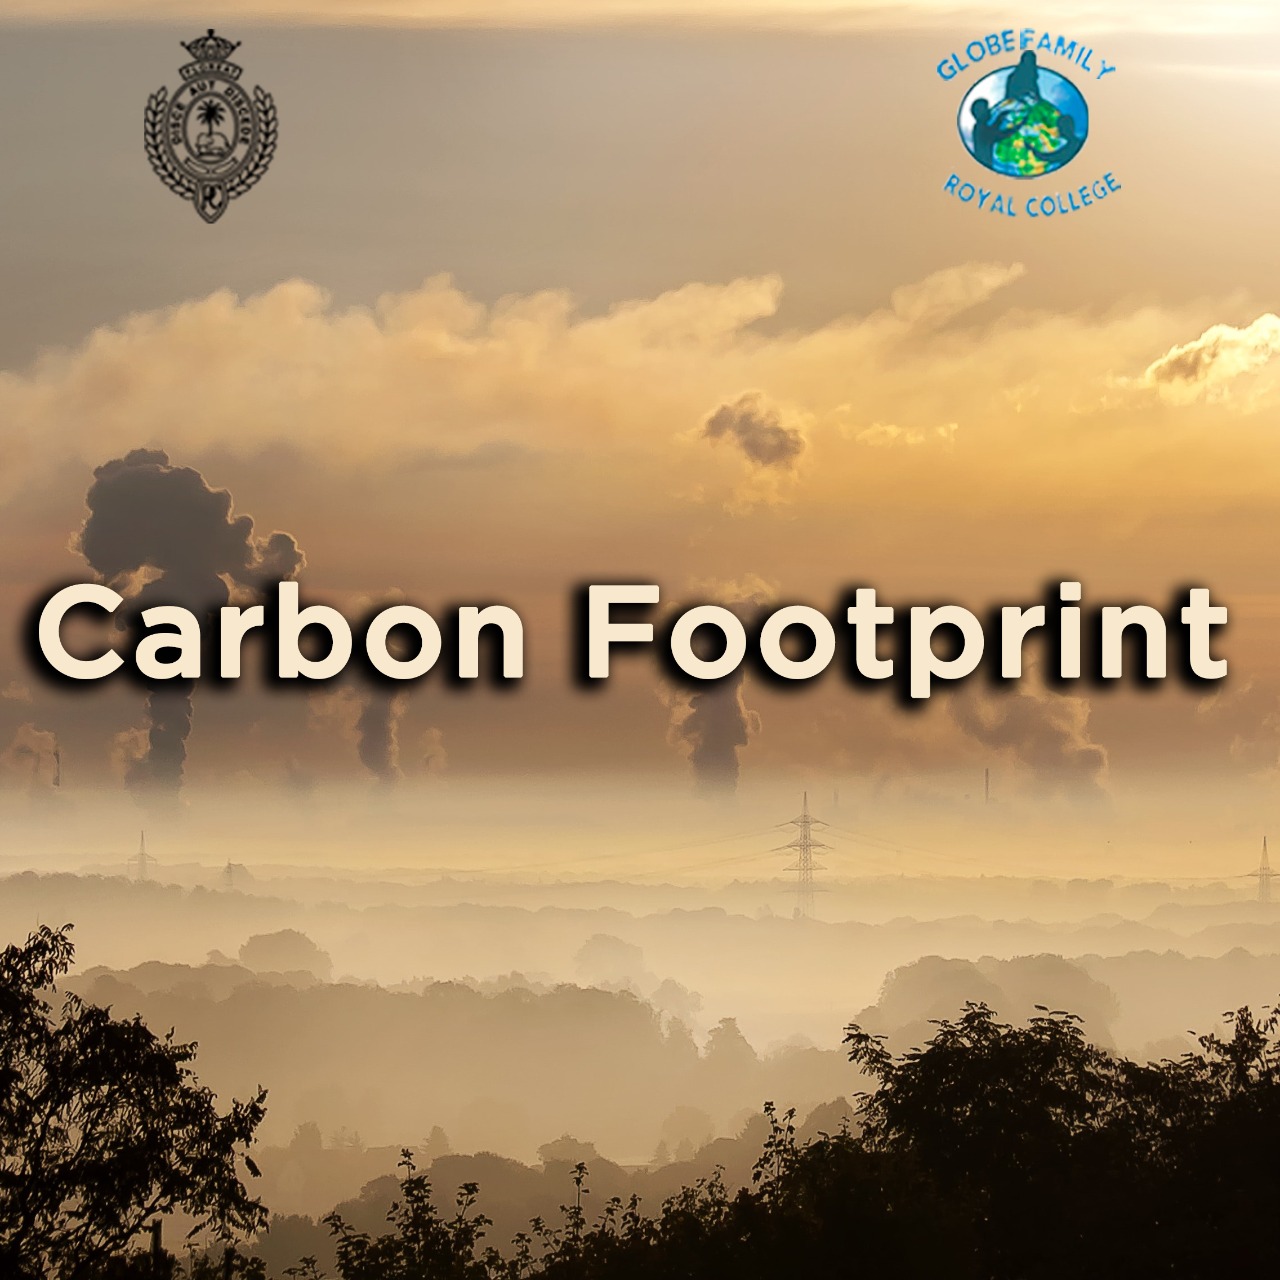 Carbon Footprint - The Royal College